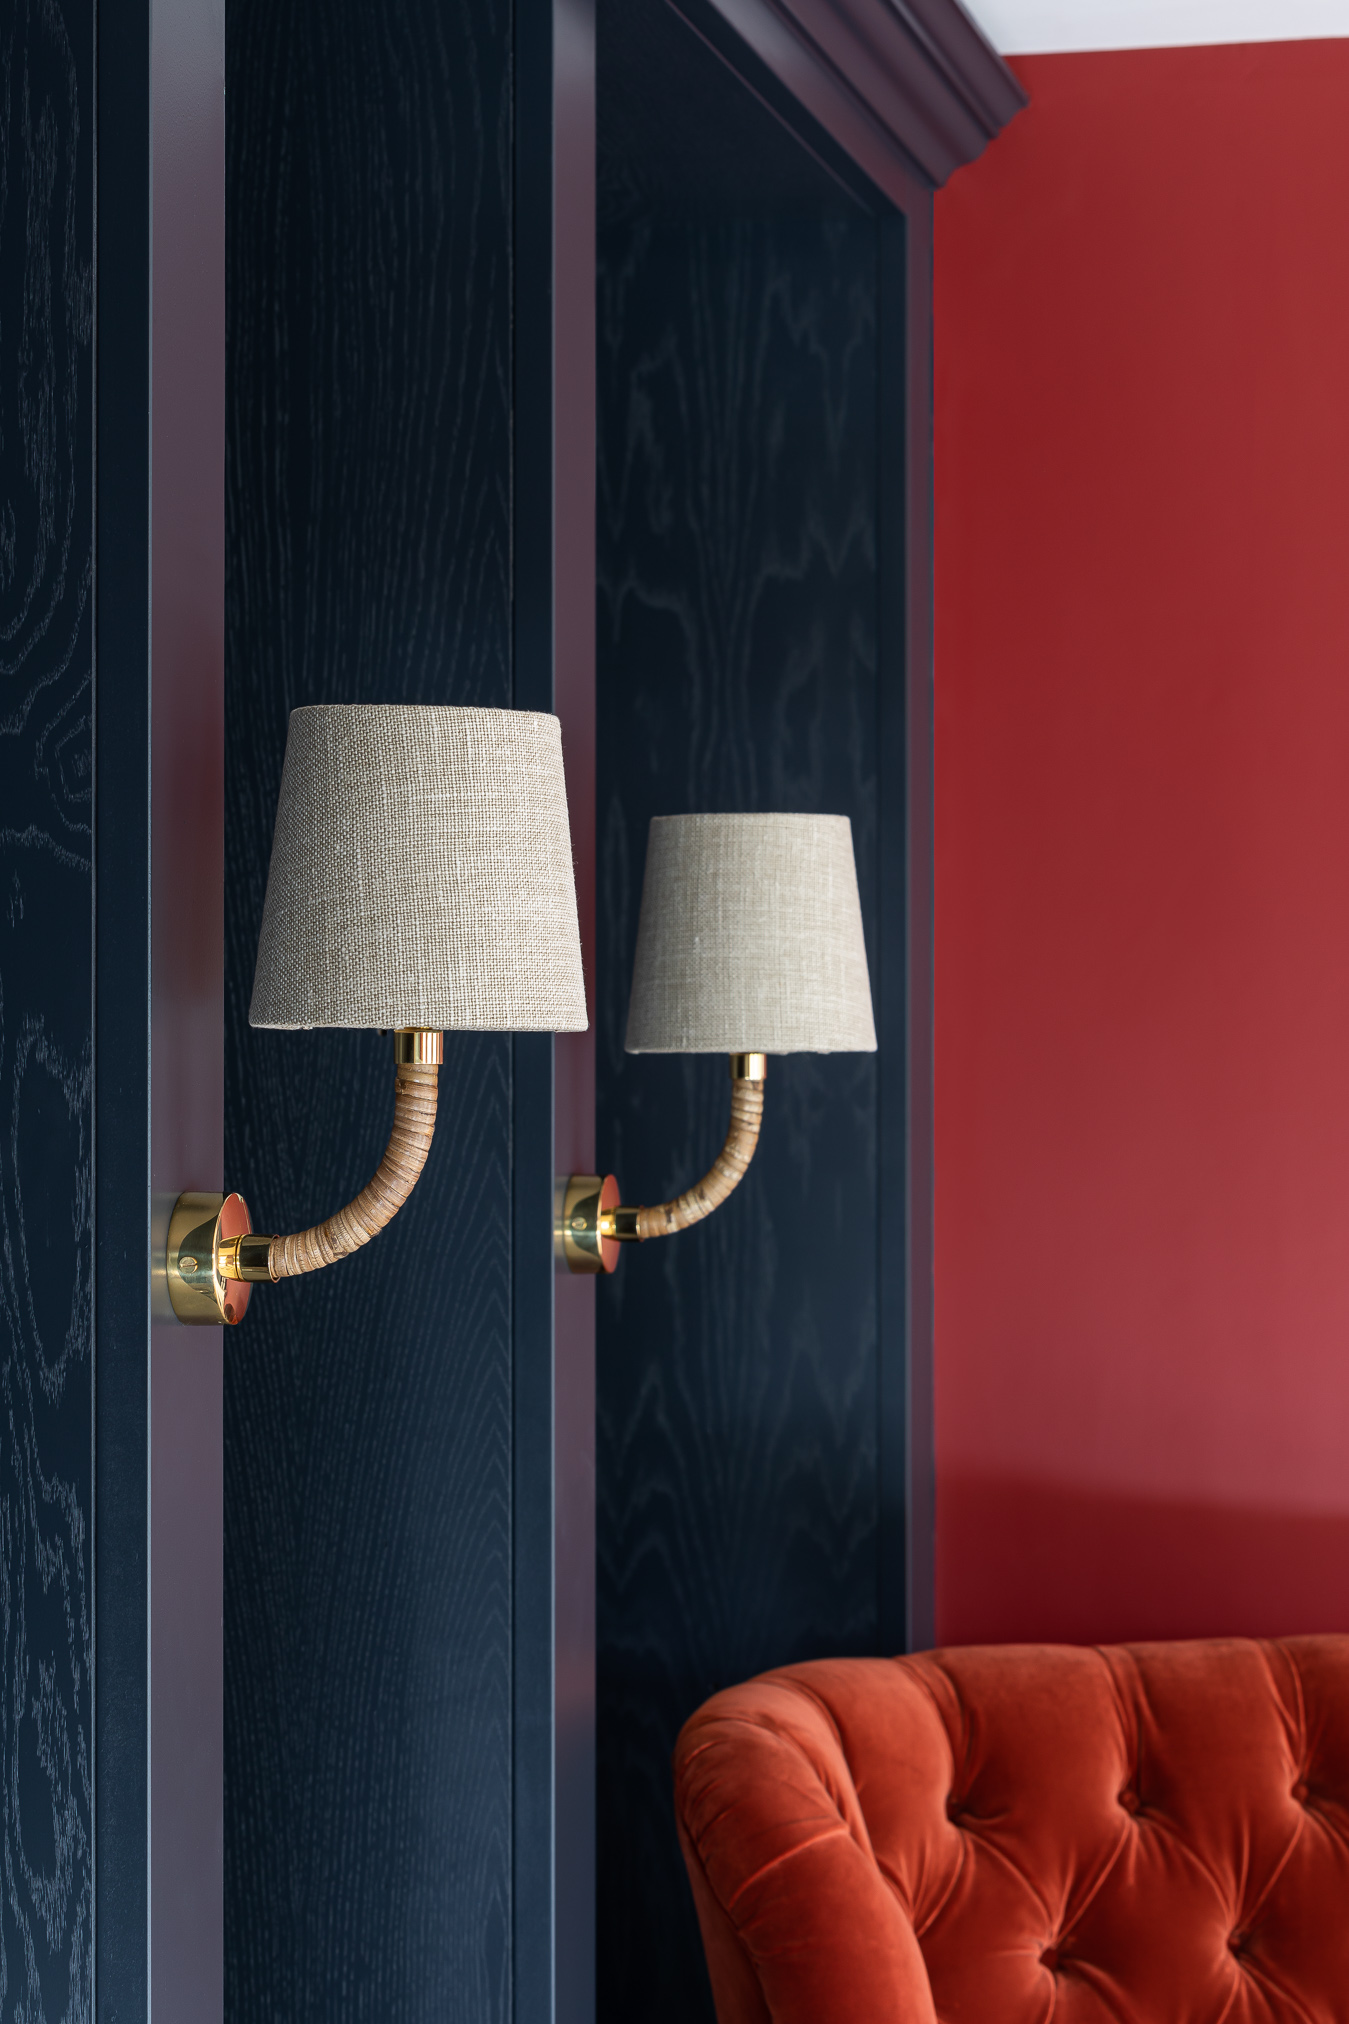 Dark bookcase joinery Porta romana wall lights red velvet chair and walls